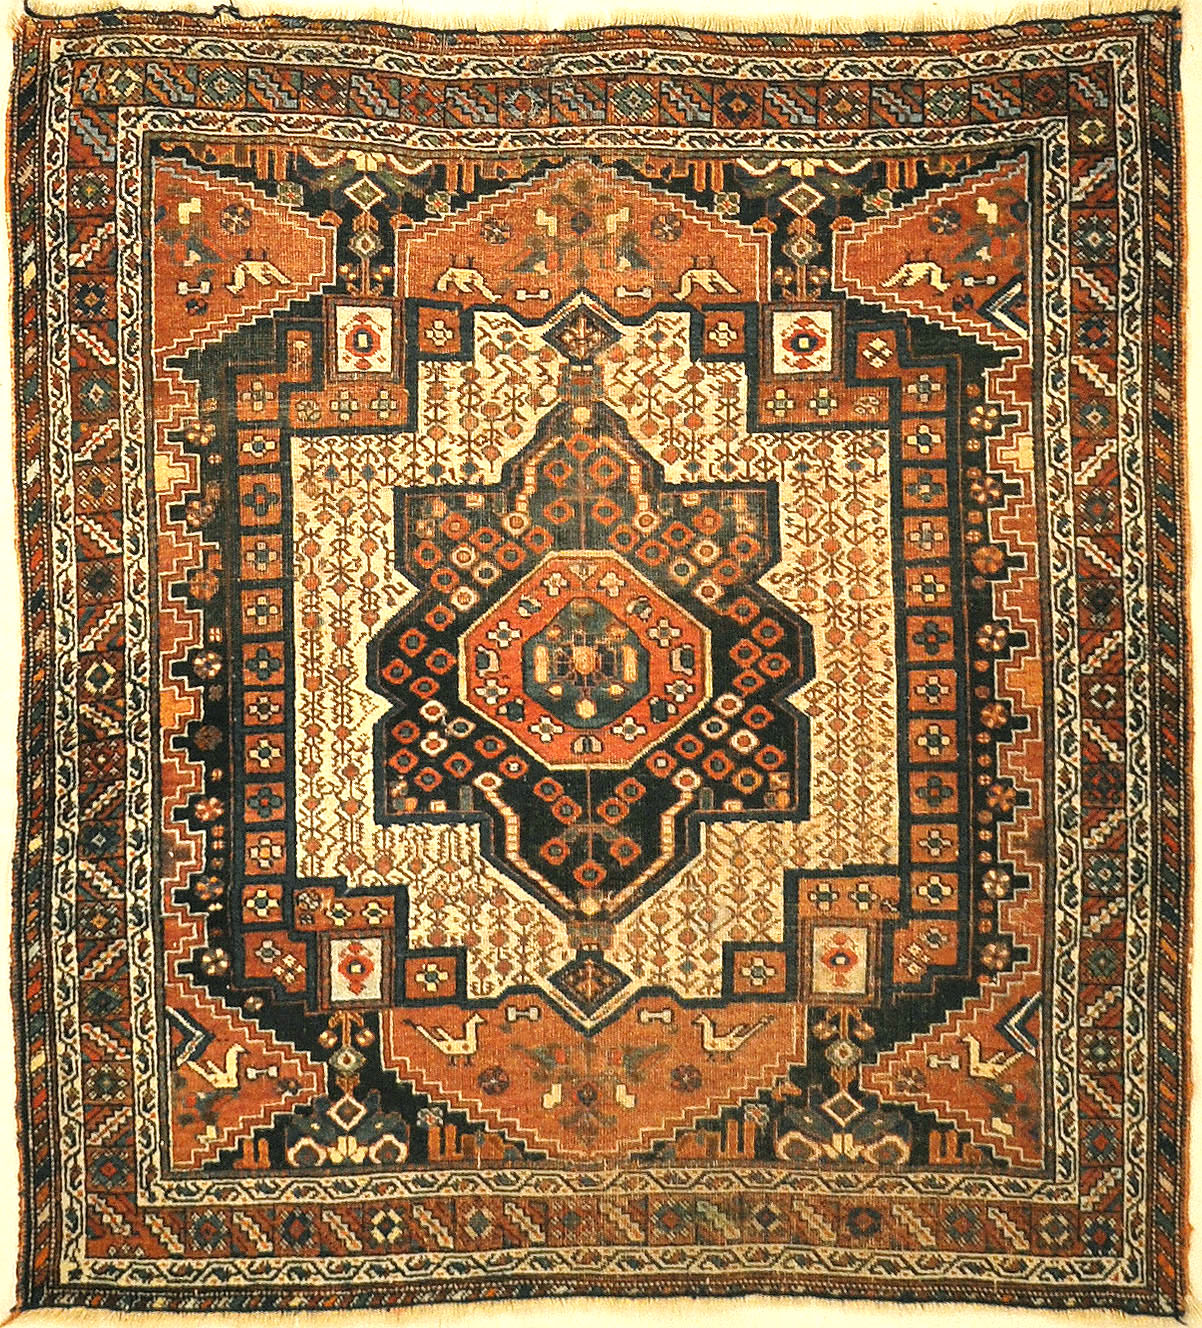 Antique Persian Afshar Rug Circa 1880. A piece of genuine authentic antique woven carpet art sold by Santa Barbara Design Center Rugs and More.